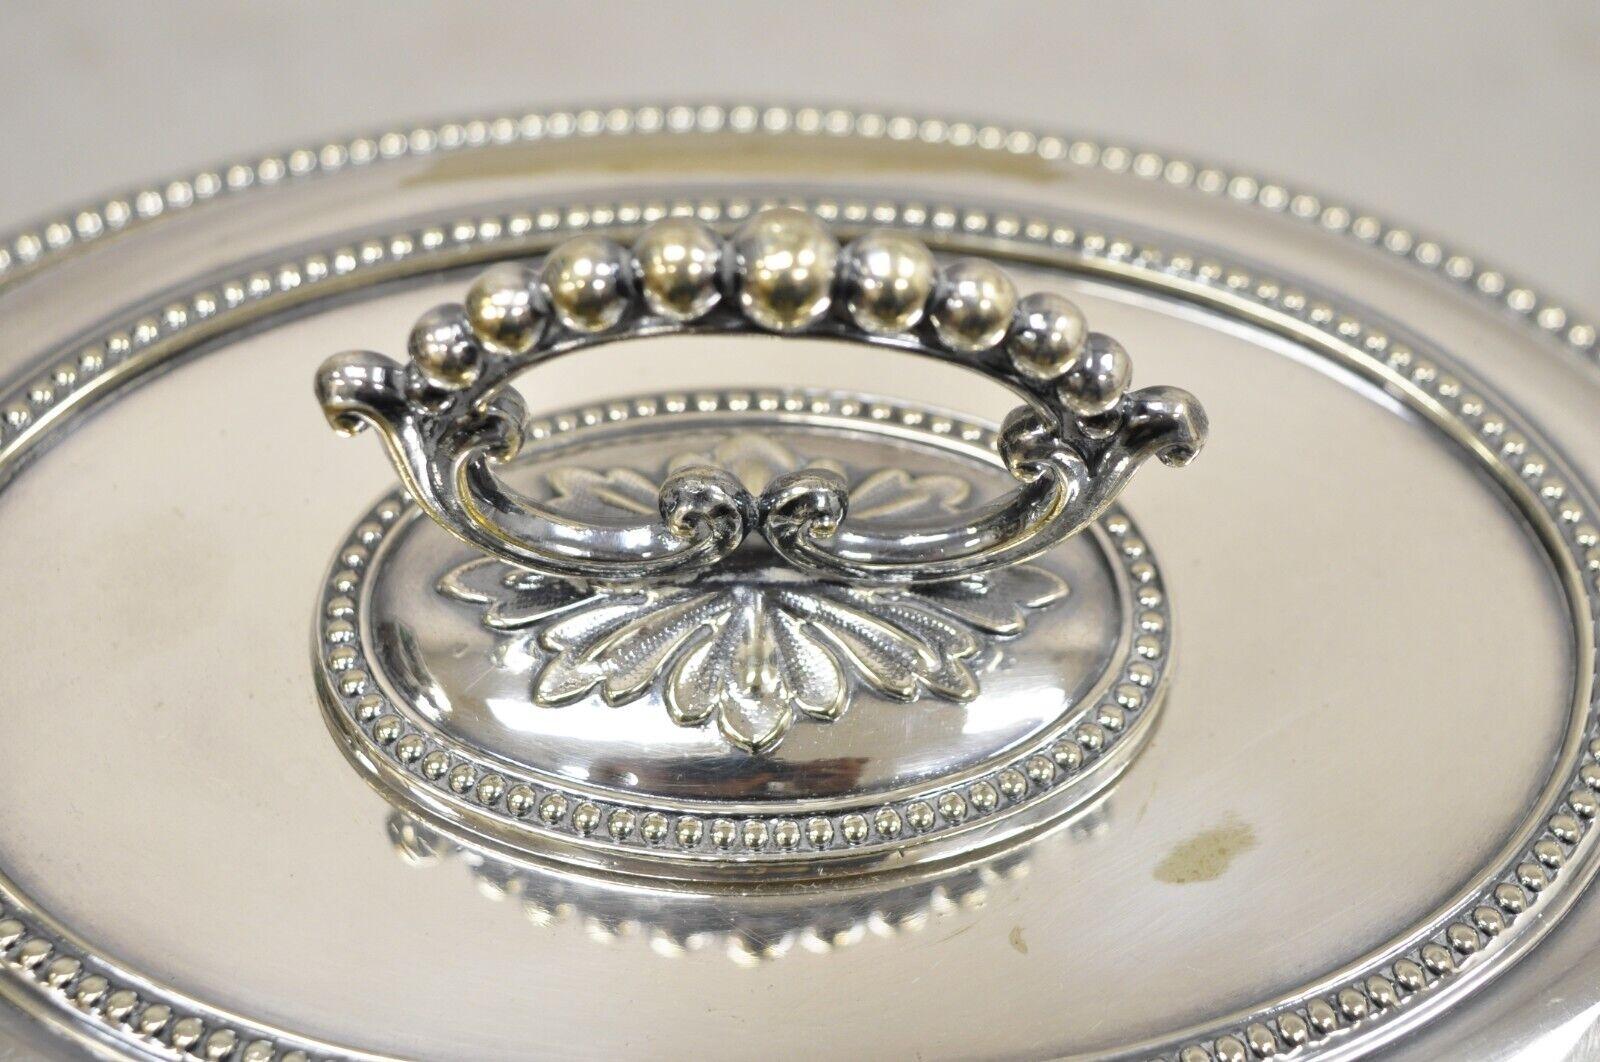 20th Century Mappin & Webb's Prince's Plate English Sheffield Silver Plated Covered Dish For Sale